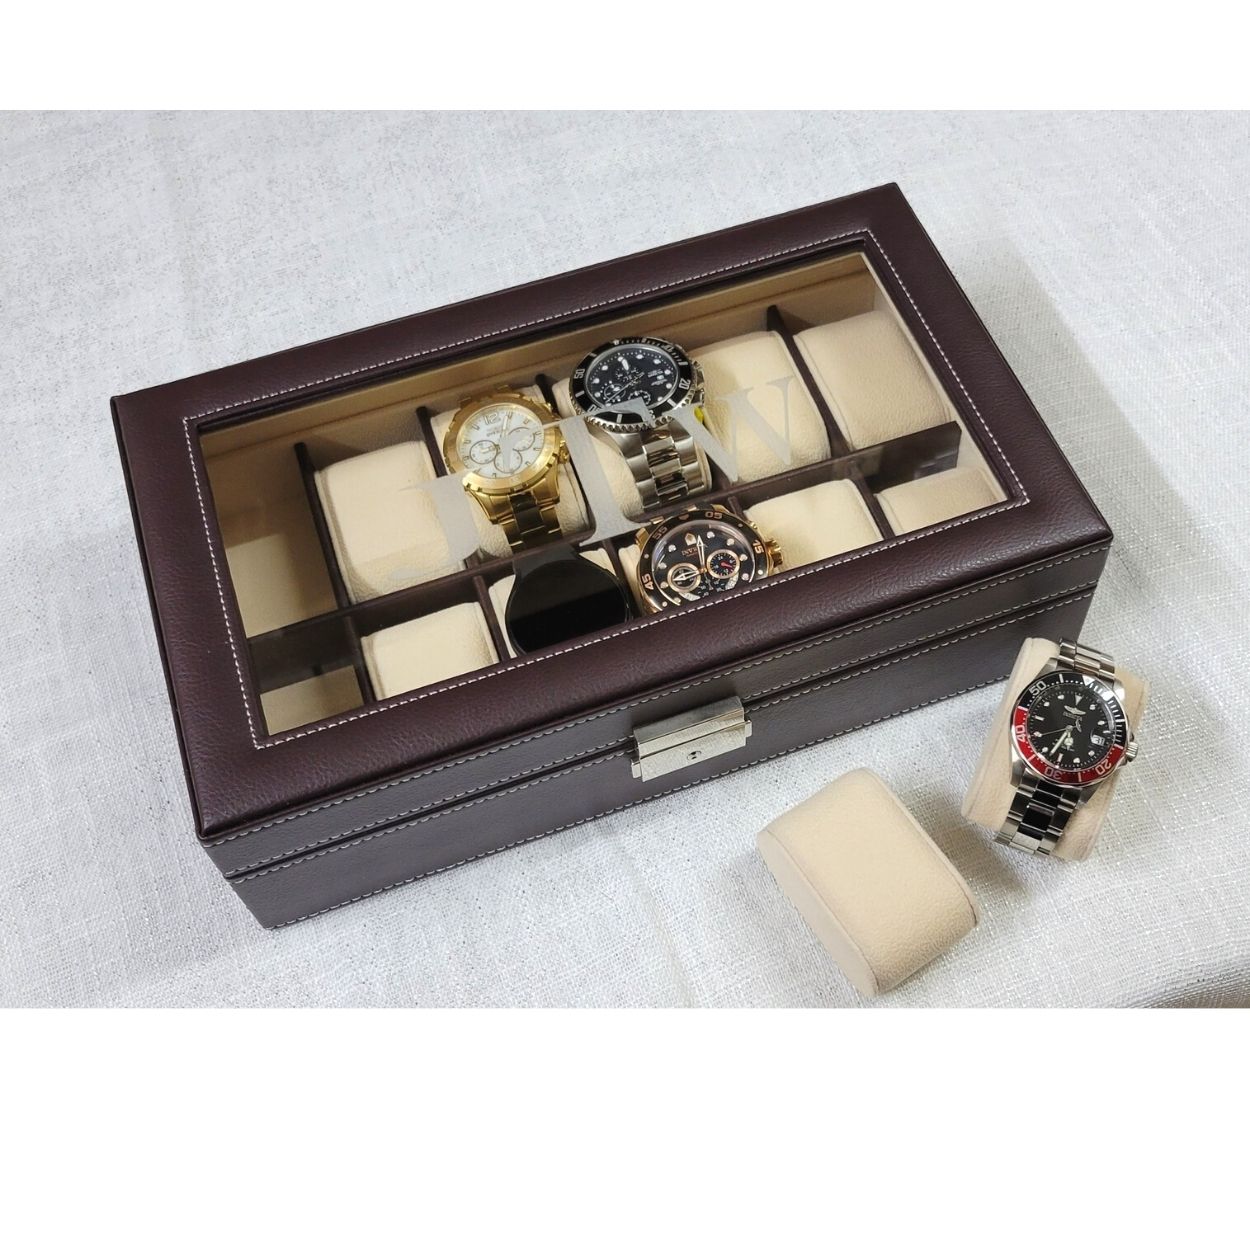 Tie Box Storage Case Organizer in Wood Glass Lid Valet - 12 Compartments